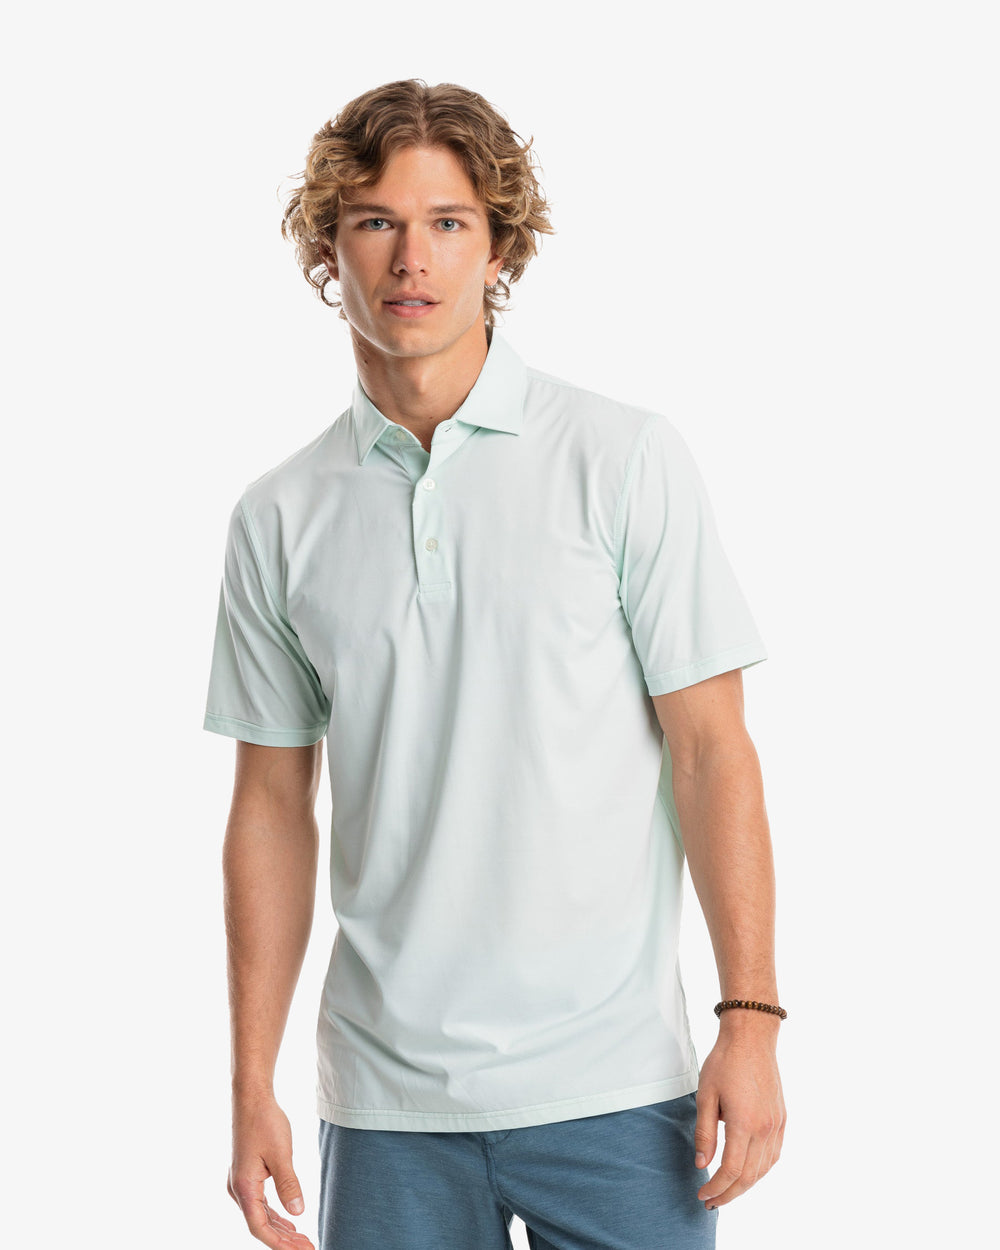 The model front view of the Men's Sawgrass Stripe brrr°®-eeze Performance Polo Shirt by Southern Tide - Mist Green